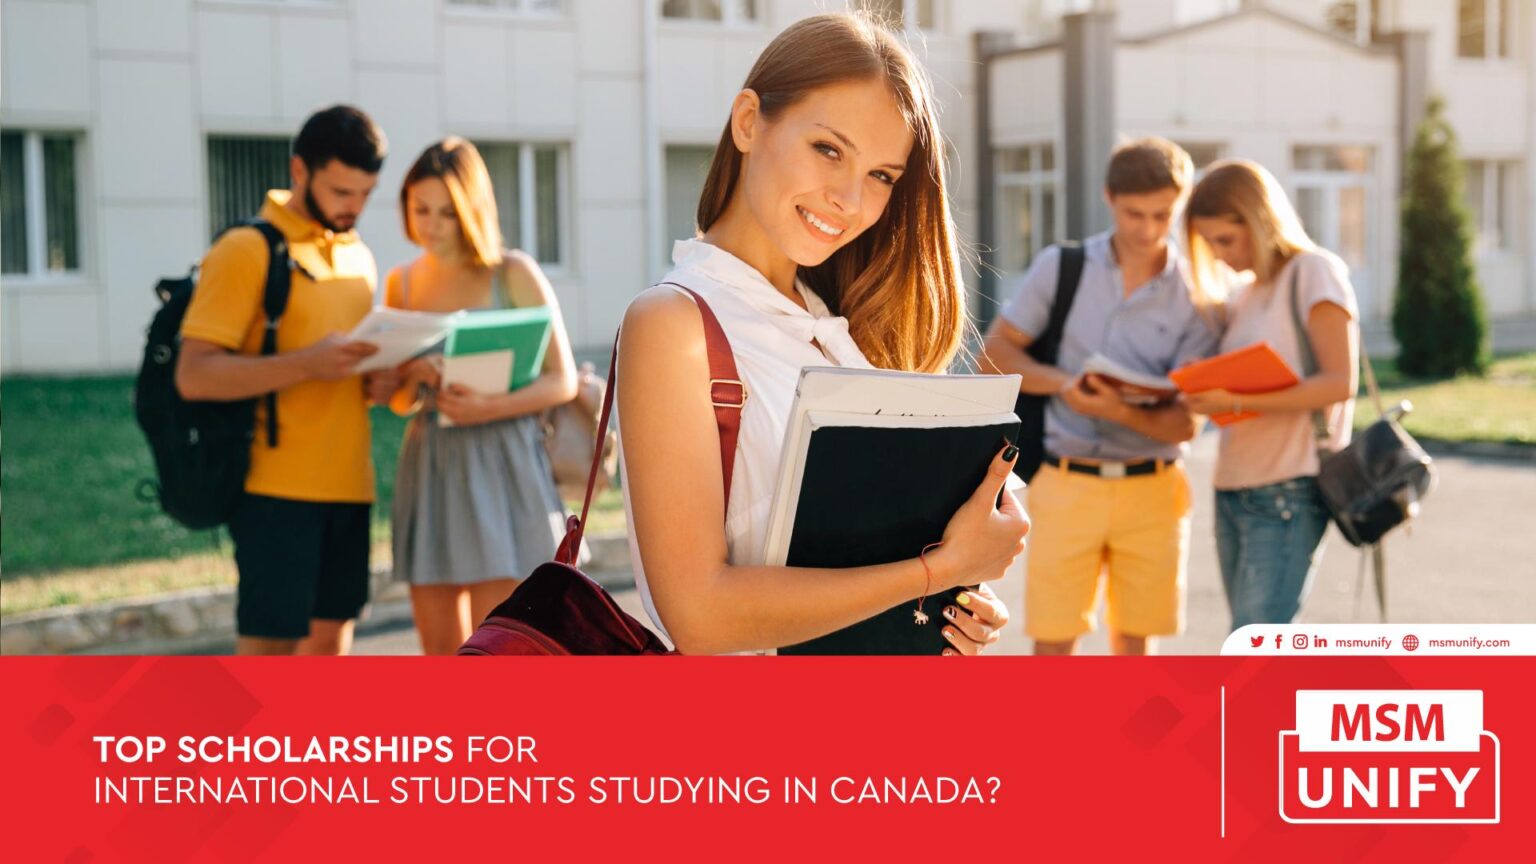 a-girl-international-student-explaining-about-Top-Scholarships-for-International-Students-Studying-in-Canada